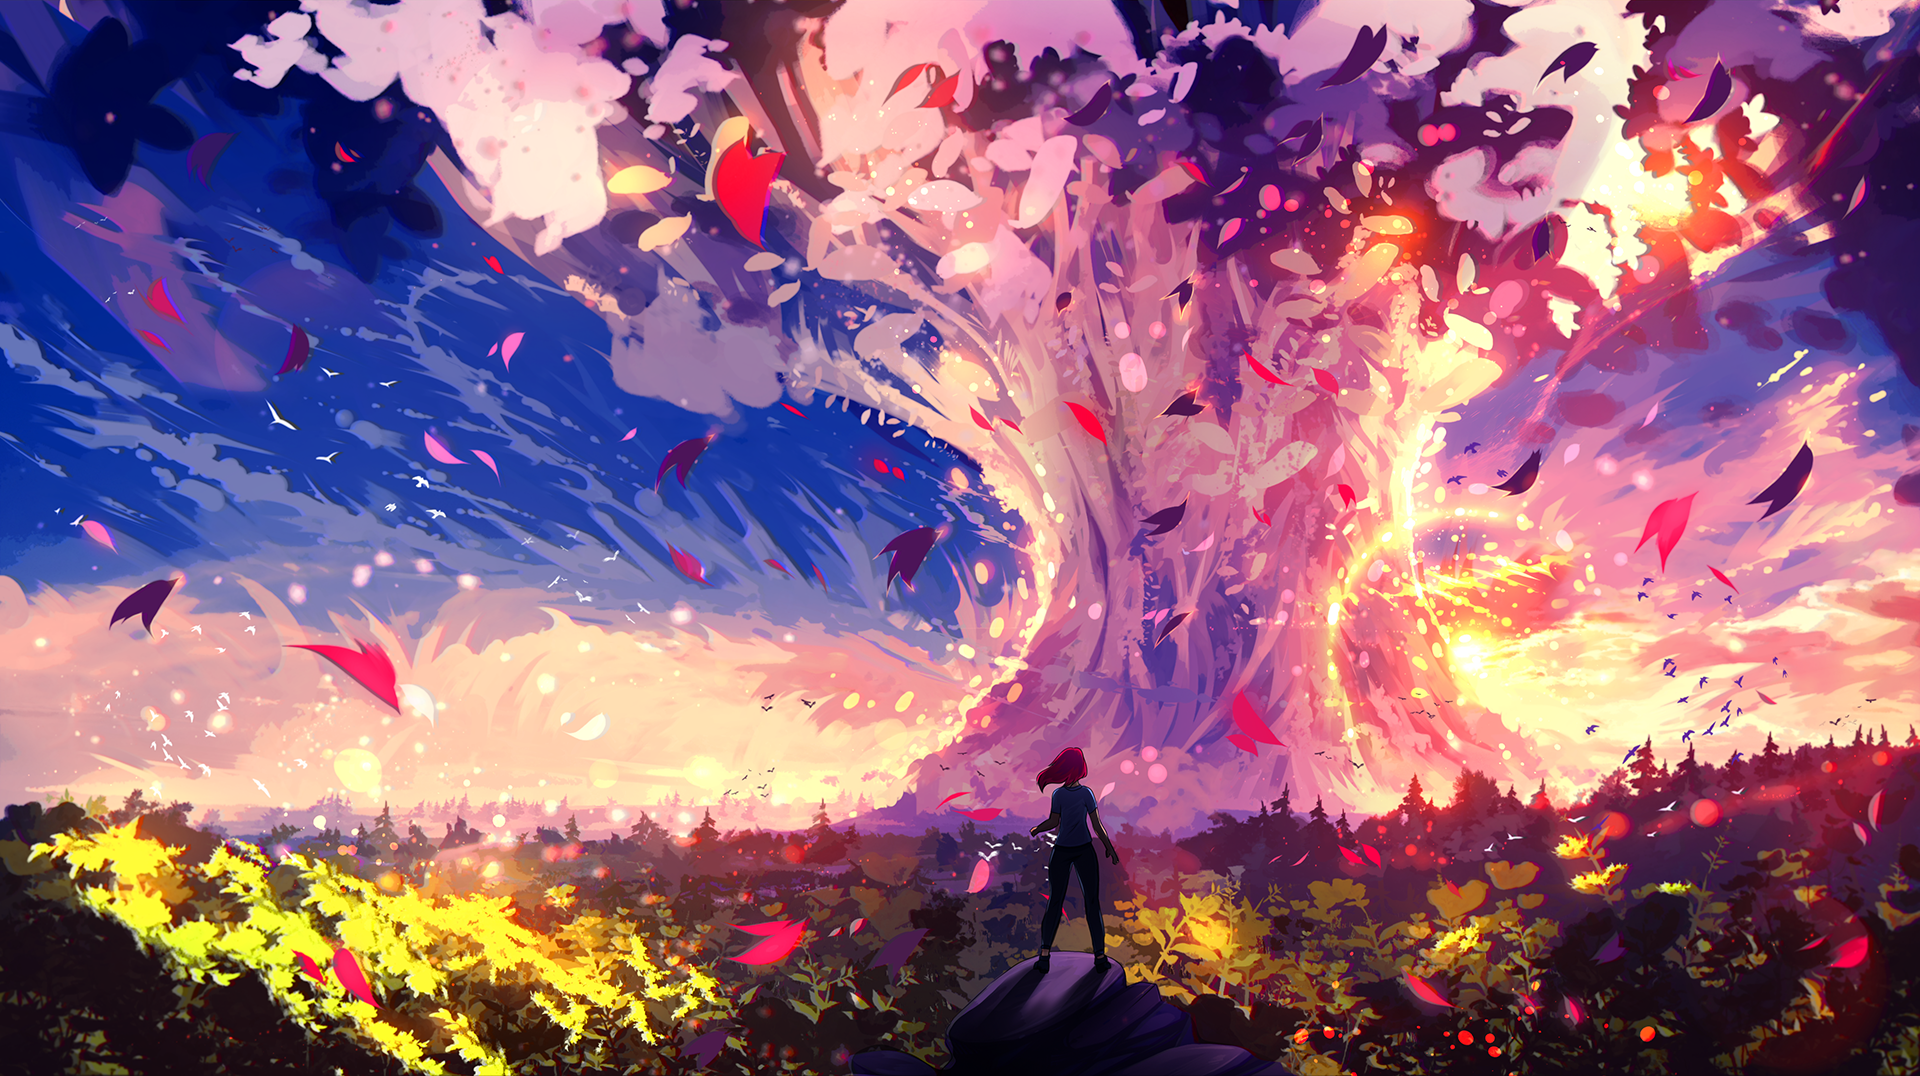 Greenery Explosion Colorful People Forest Windy Sky Digital Art 1920x1076